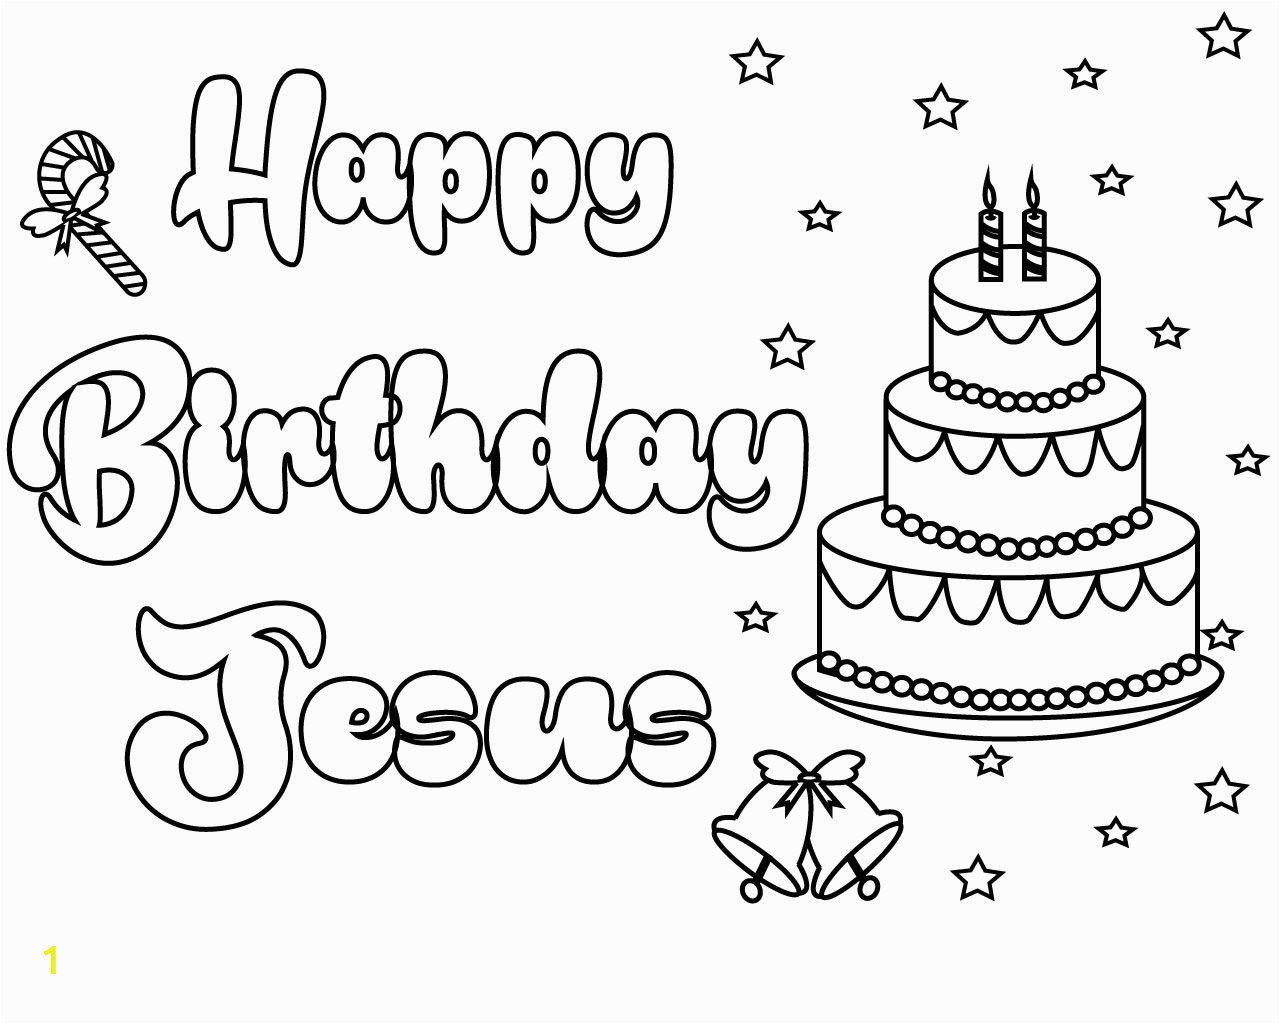 Happy Birthday Jesus Printable Coloring Pages Happy Birthday Jesus Coloring Pages Free Printable